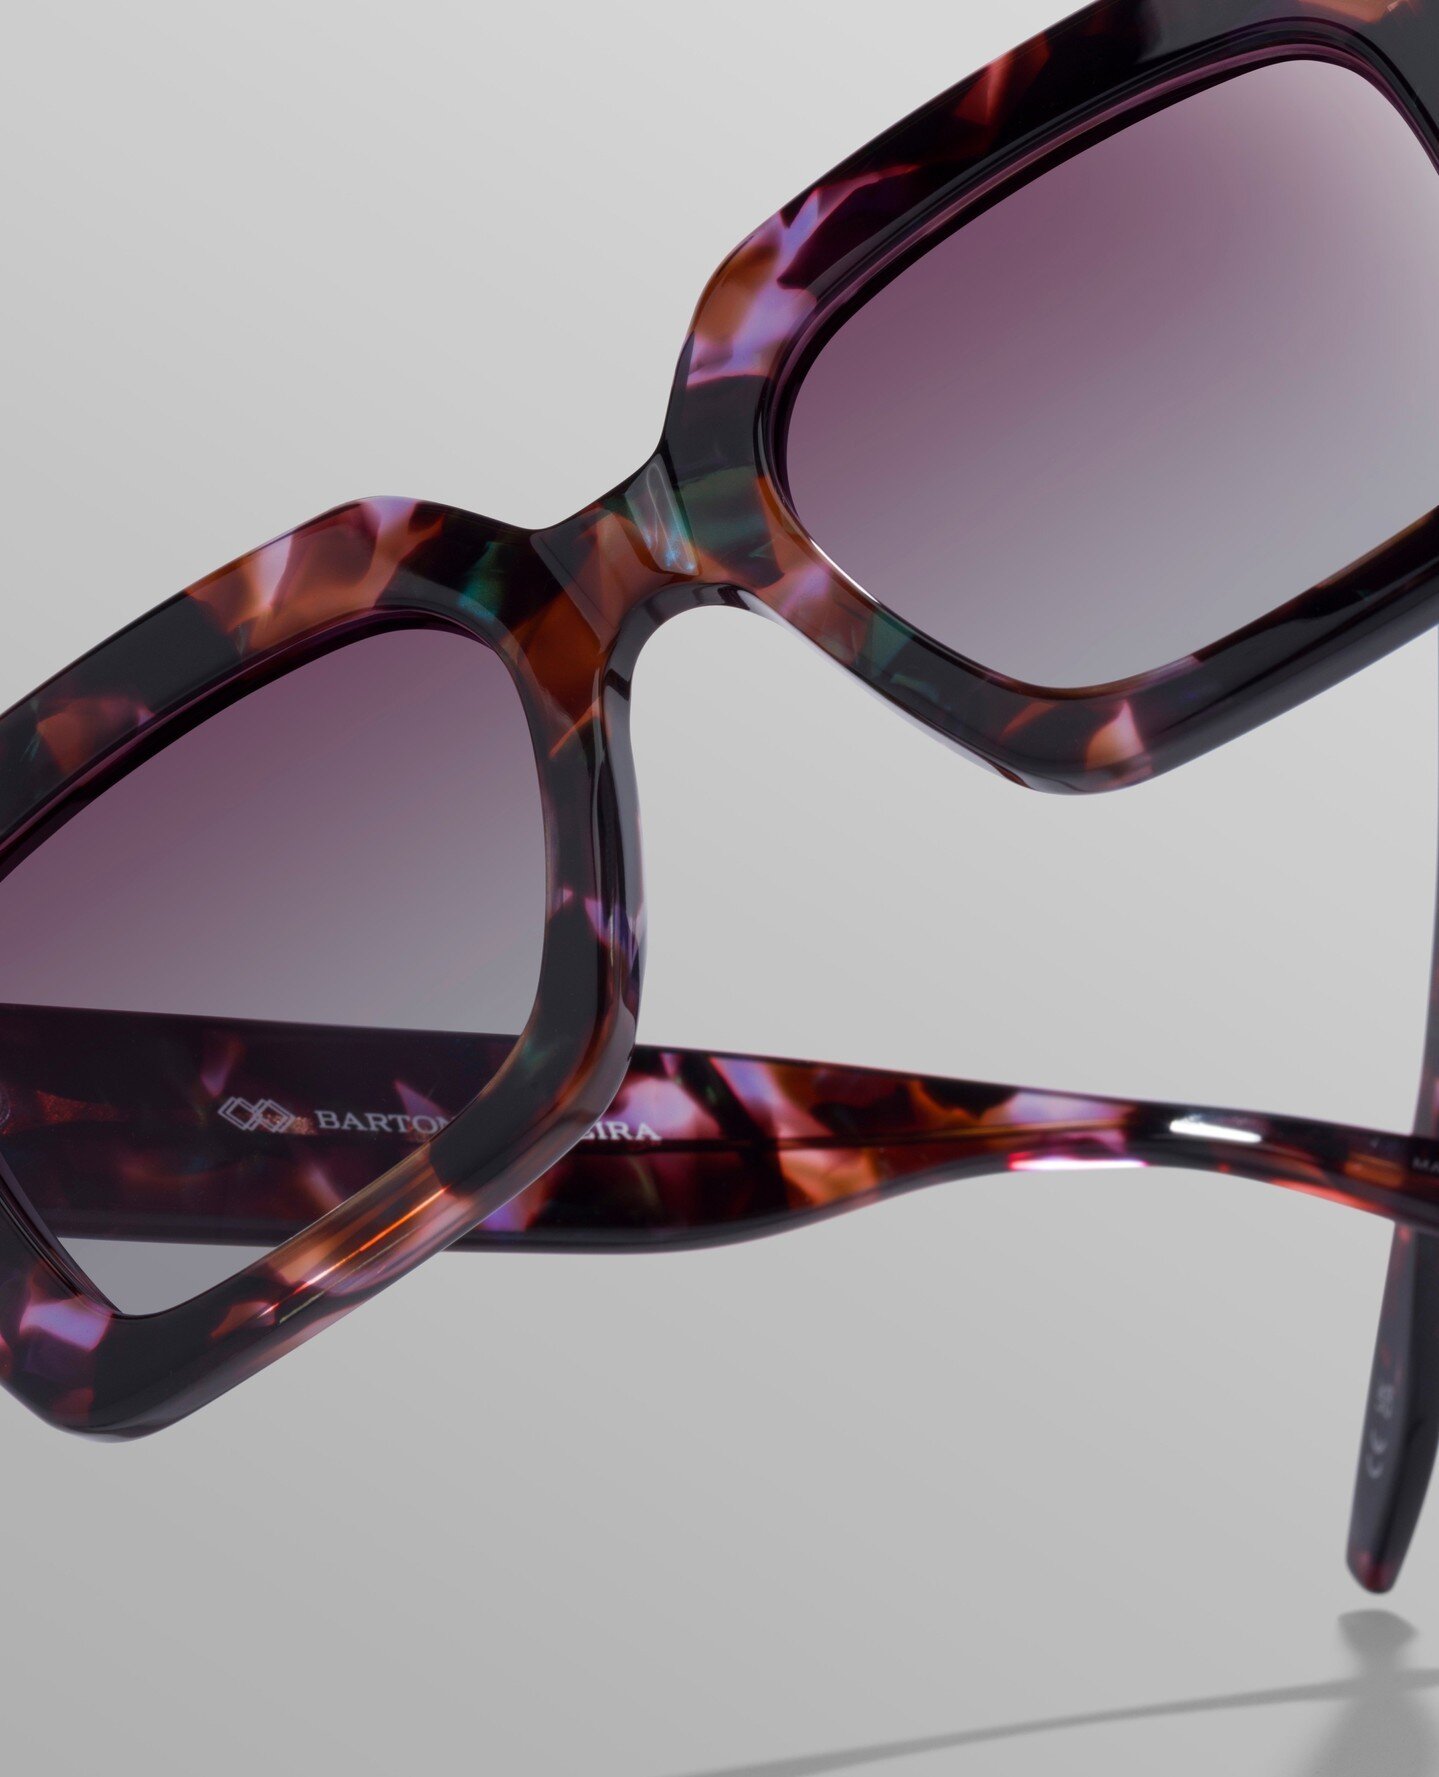 INTRODUCING THE NEW WAILUA | Uplift your spirit with this glamorous sunglass that features hand-finished curves, chic angles, and earth-toned gradient lens colors.⁠
⁠
⁠
#BartonPerreira ⁠
#Sunglasses⁠
#SS24⁠
#TheWailua